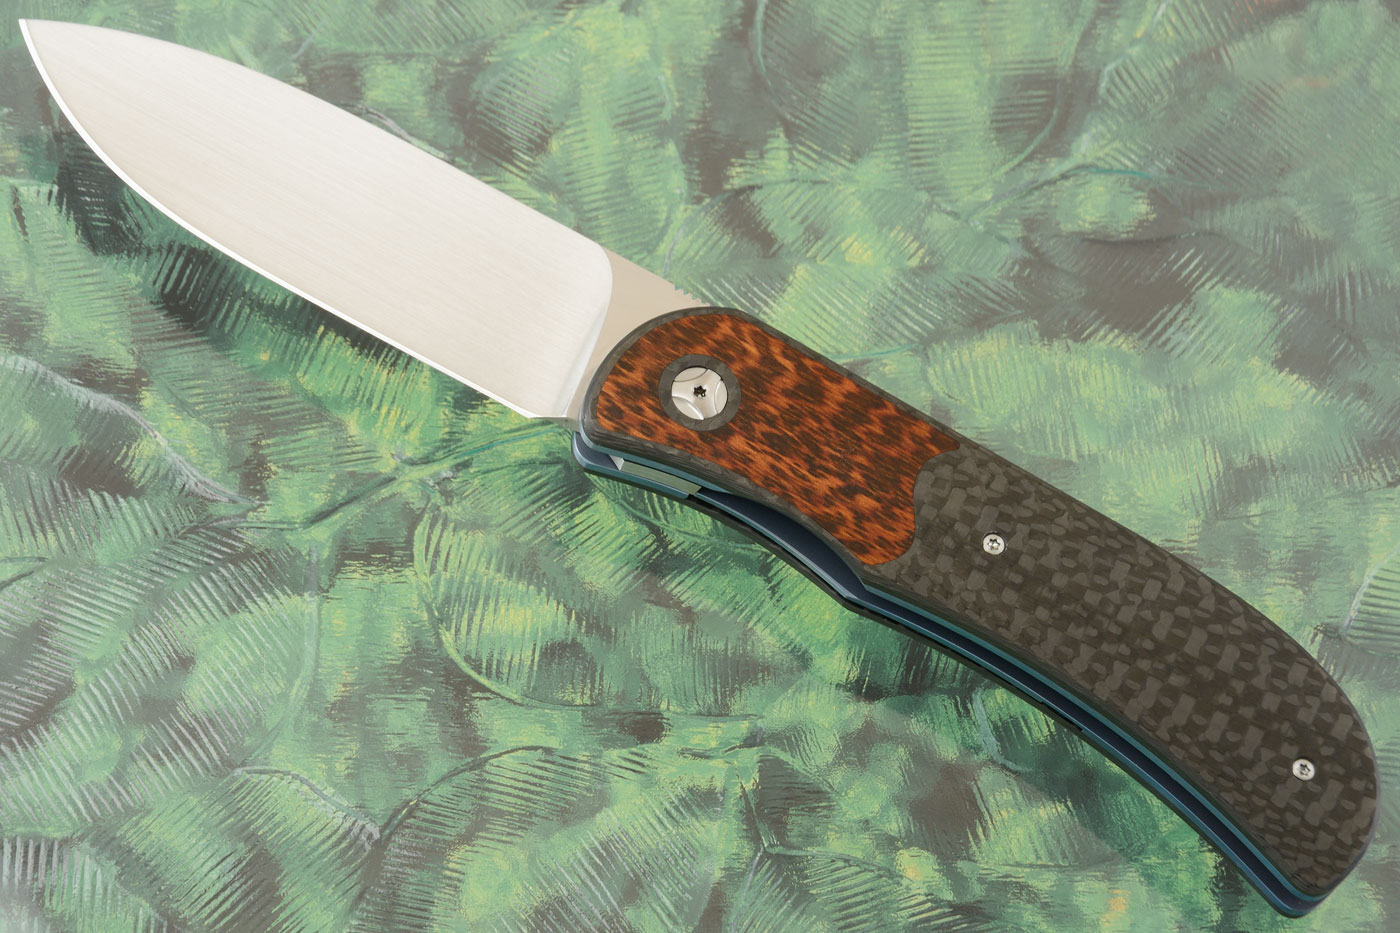 LEXK Plus Front Flipper with Carbon Fiber and Snakewood (Ceramic IKBS)